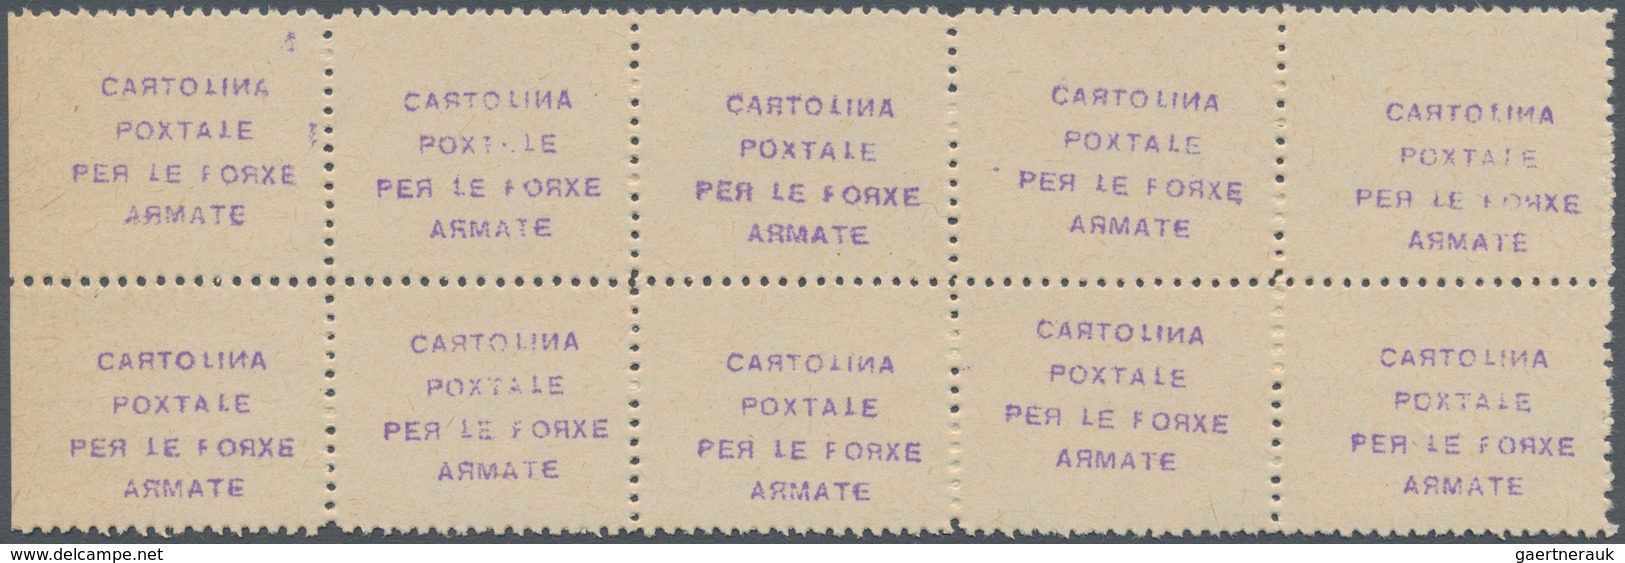 01055 Italien - Besonderheiten: 1941, Postage Free Labels For Postcards: Printed In Violet On Yellowish Pa - Non Classificati